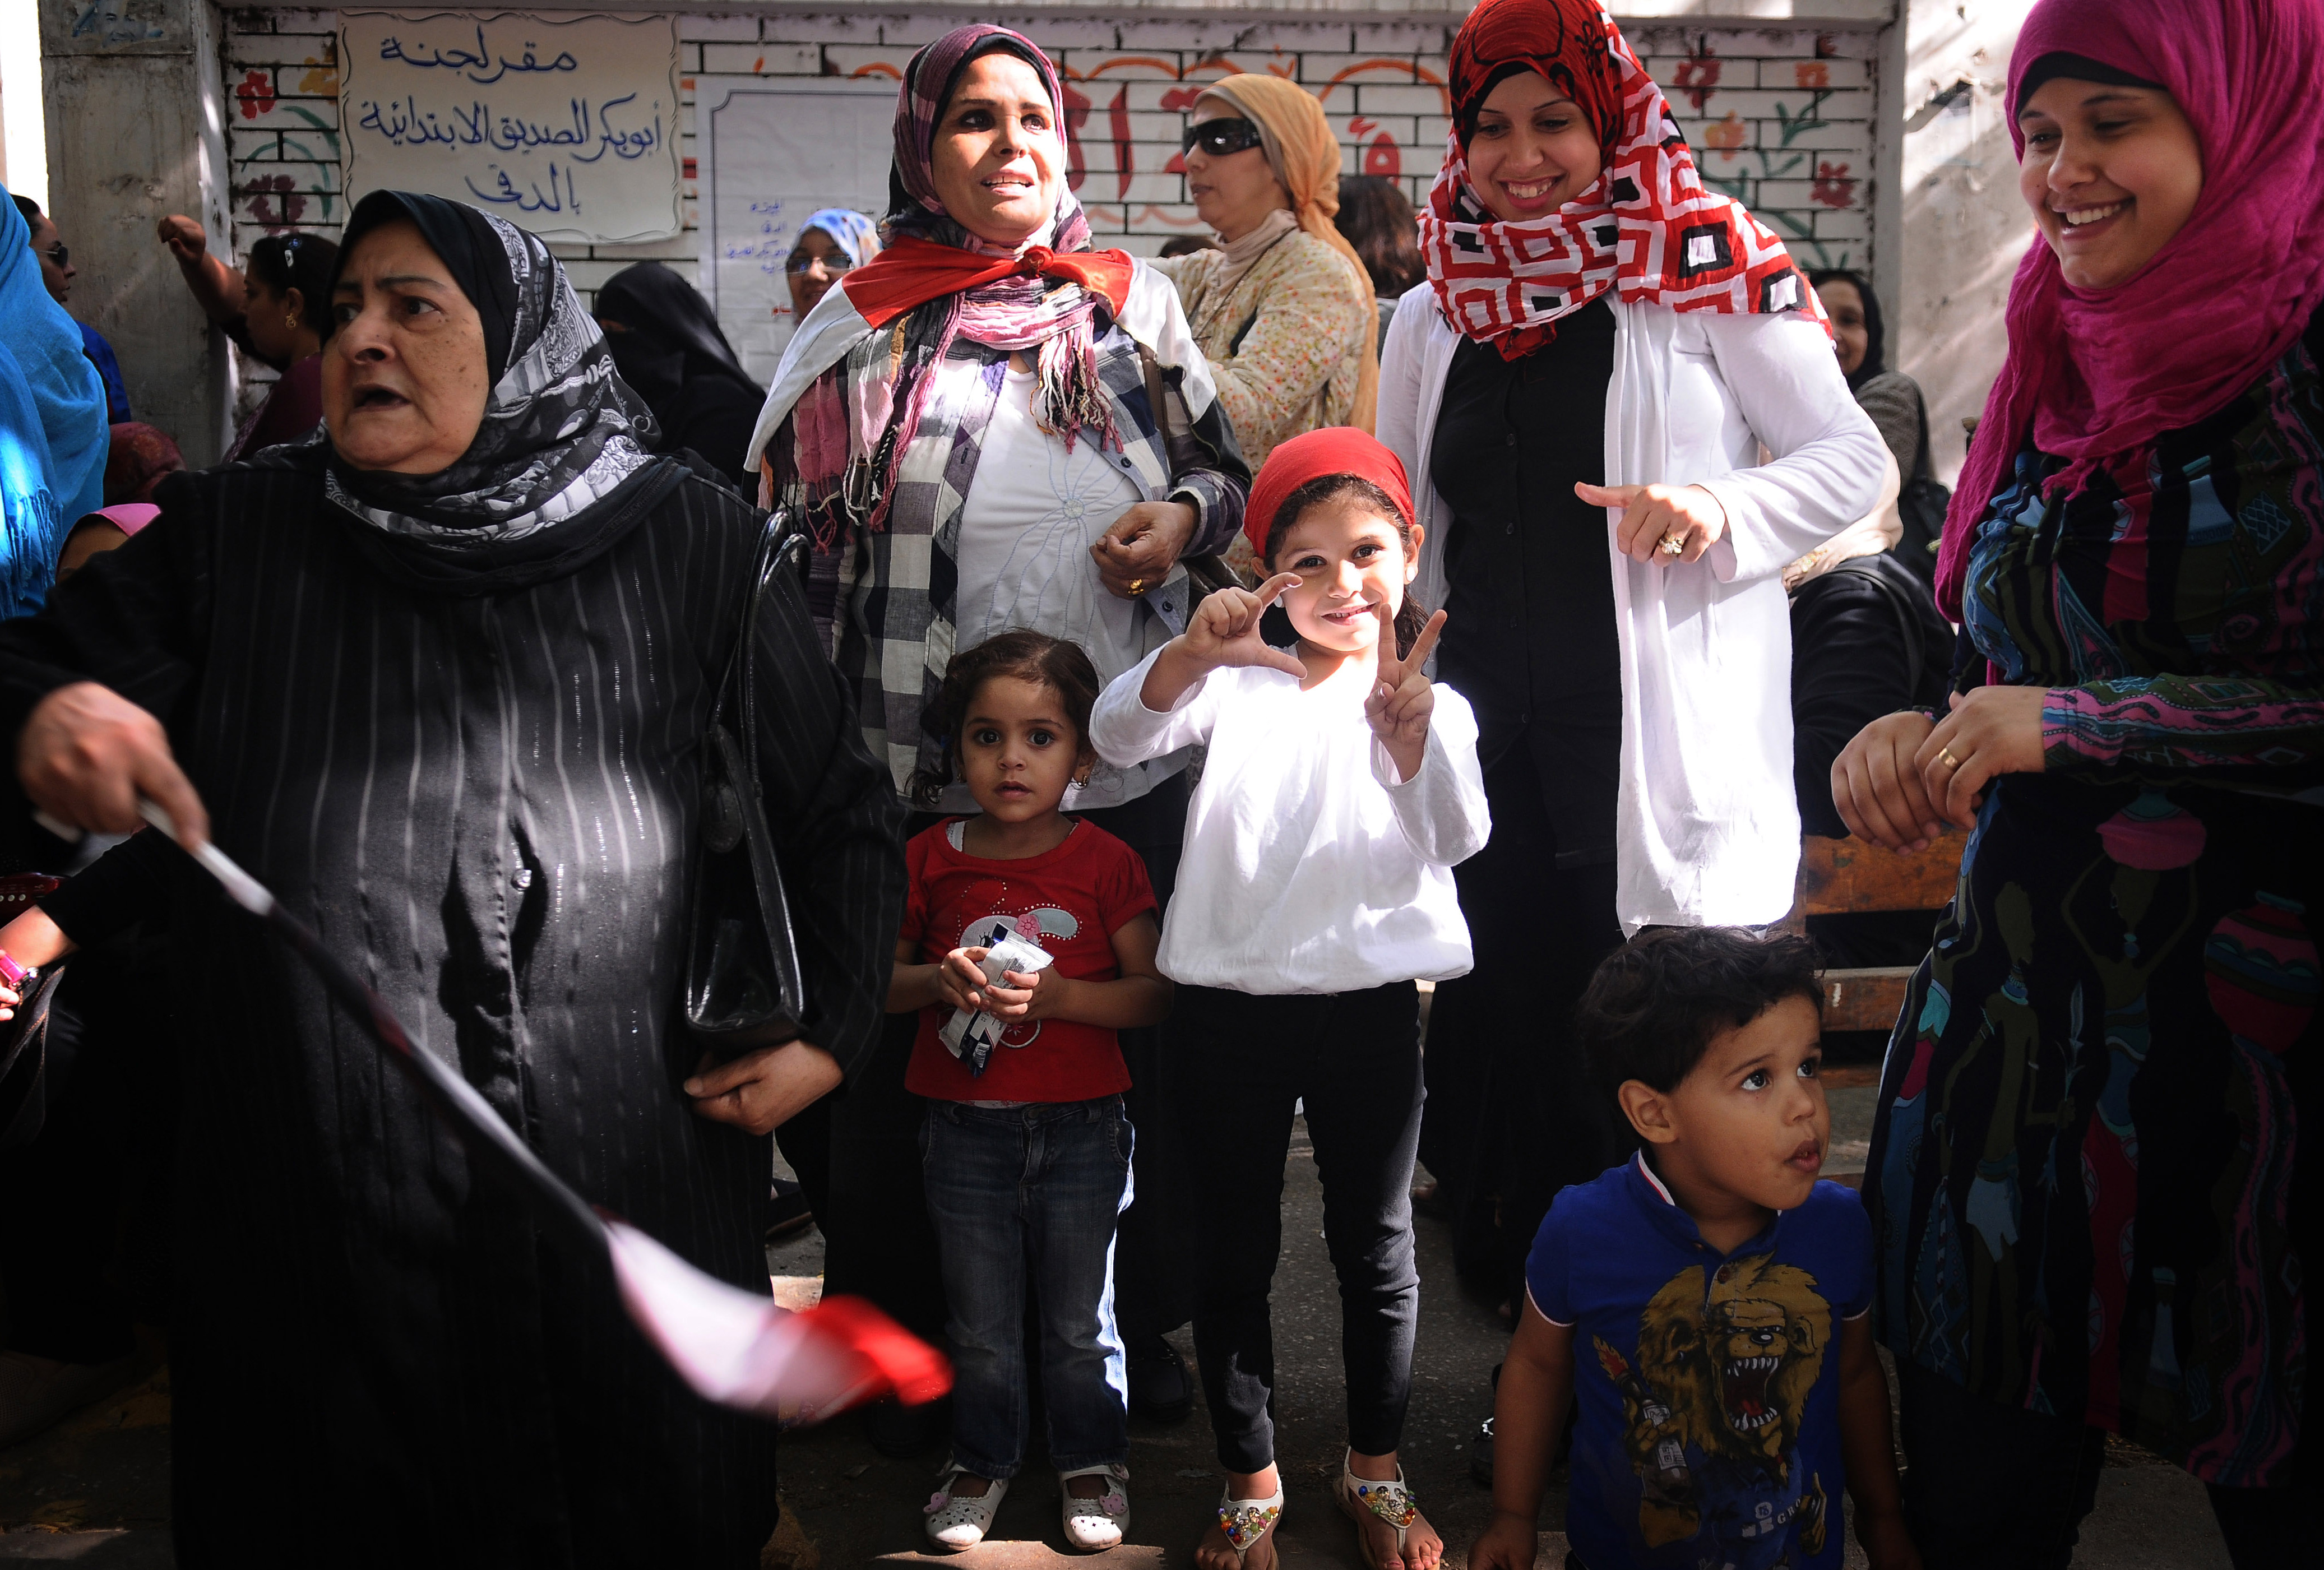 Egyptians wait in line to vote at a polling station in Cairo